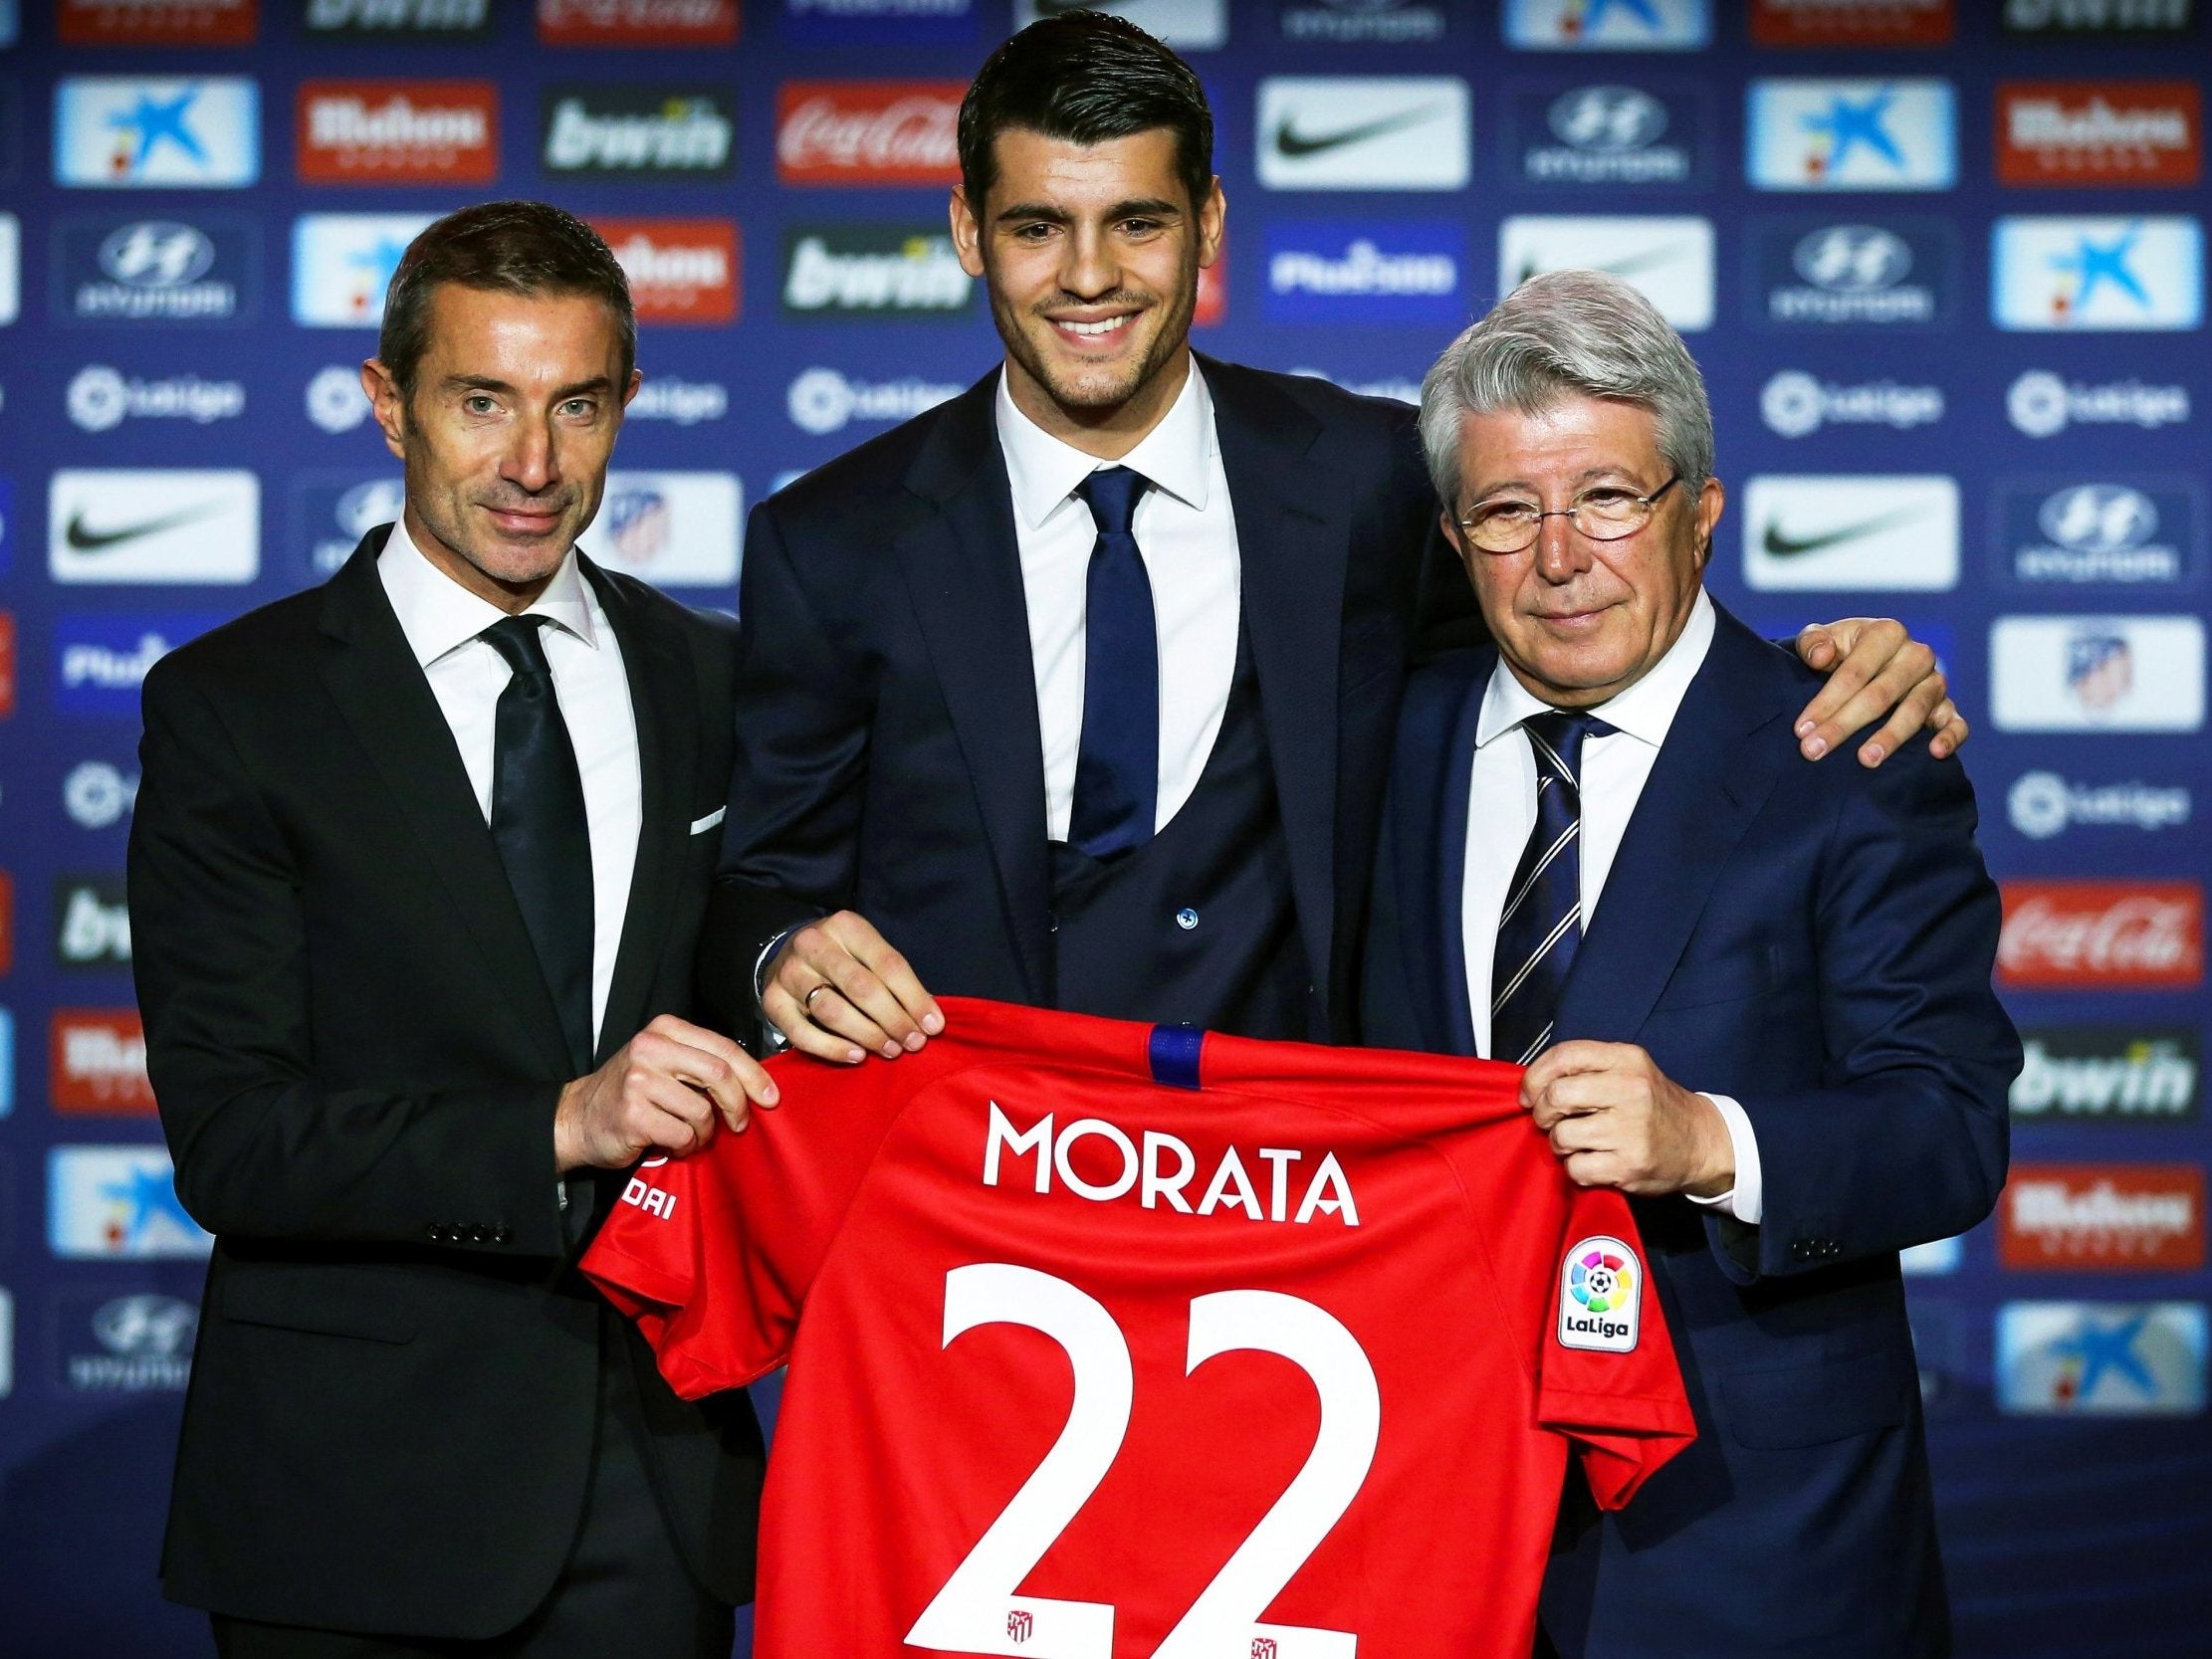 Morata was unveiled in Madrid on Tuesday